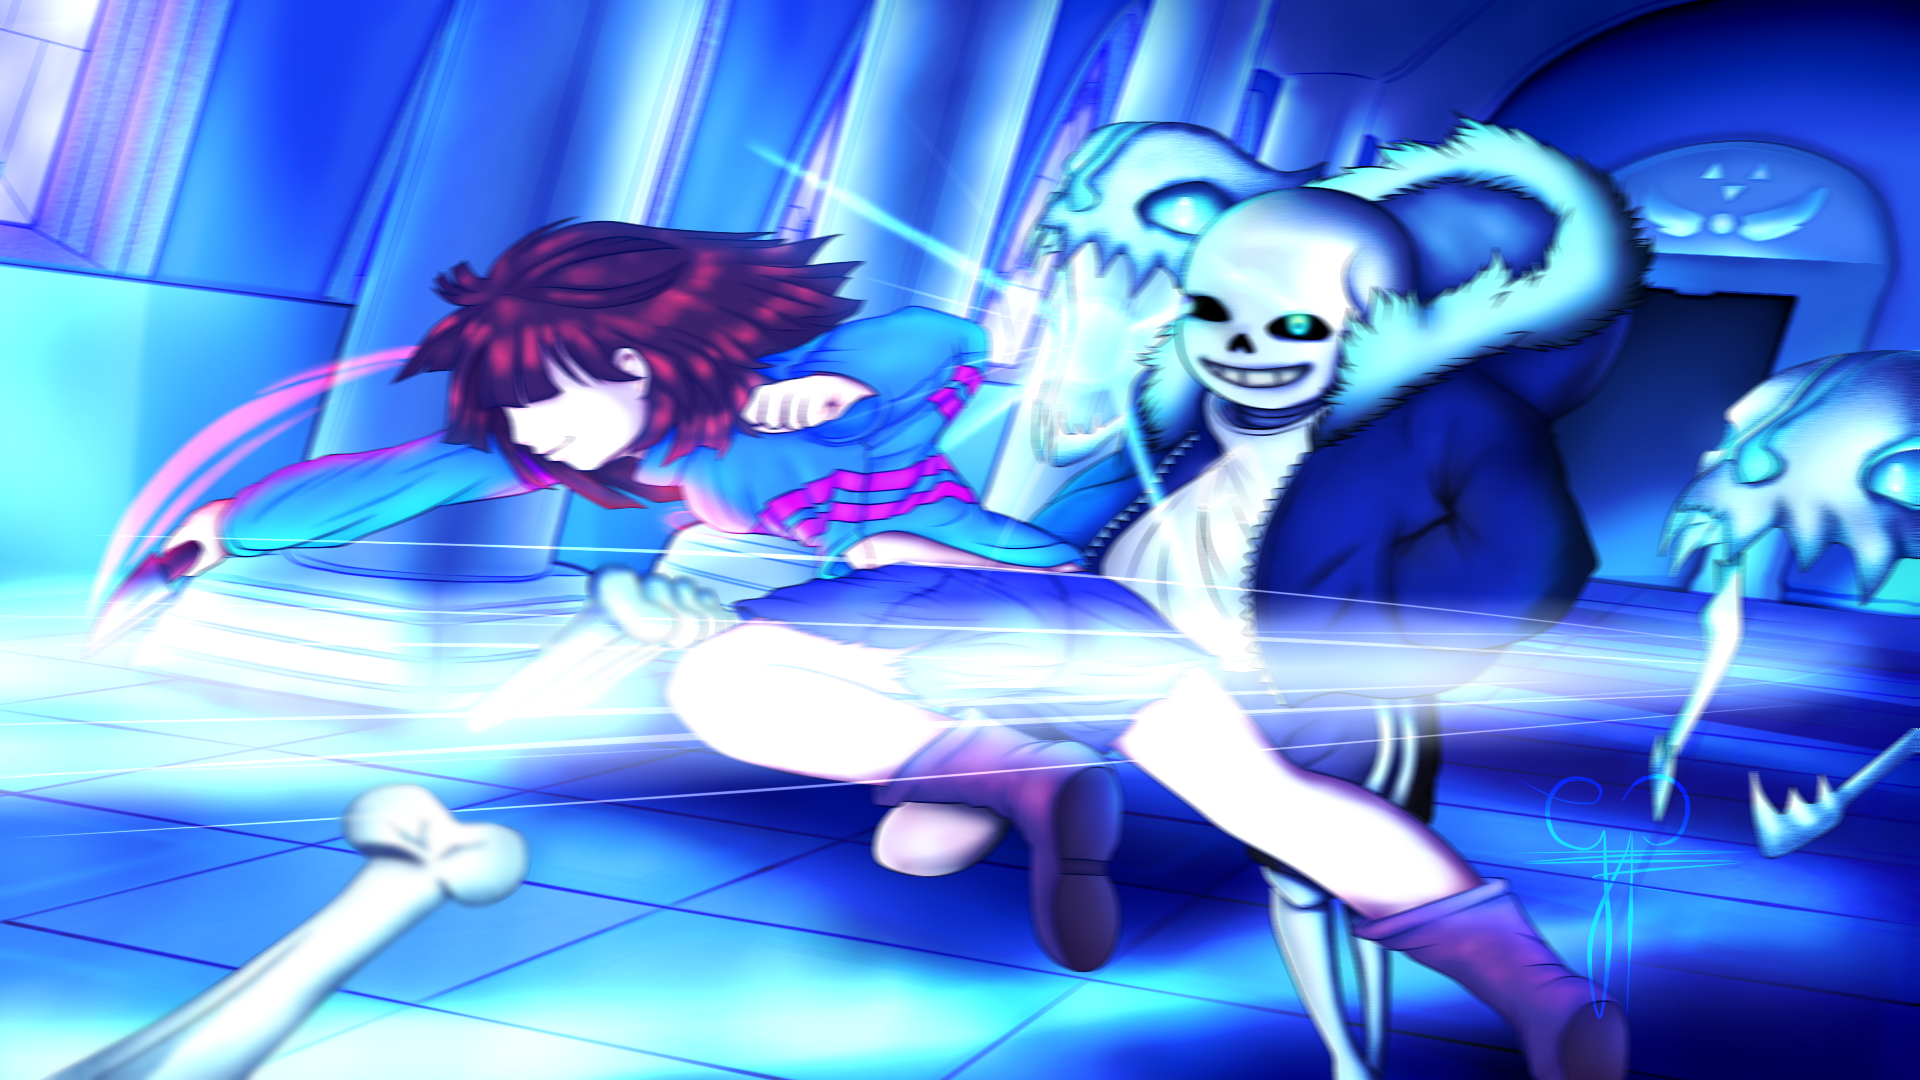 Undertale: Sans vs Frisk and Judgment Hall by: GabrielP